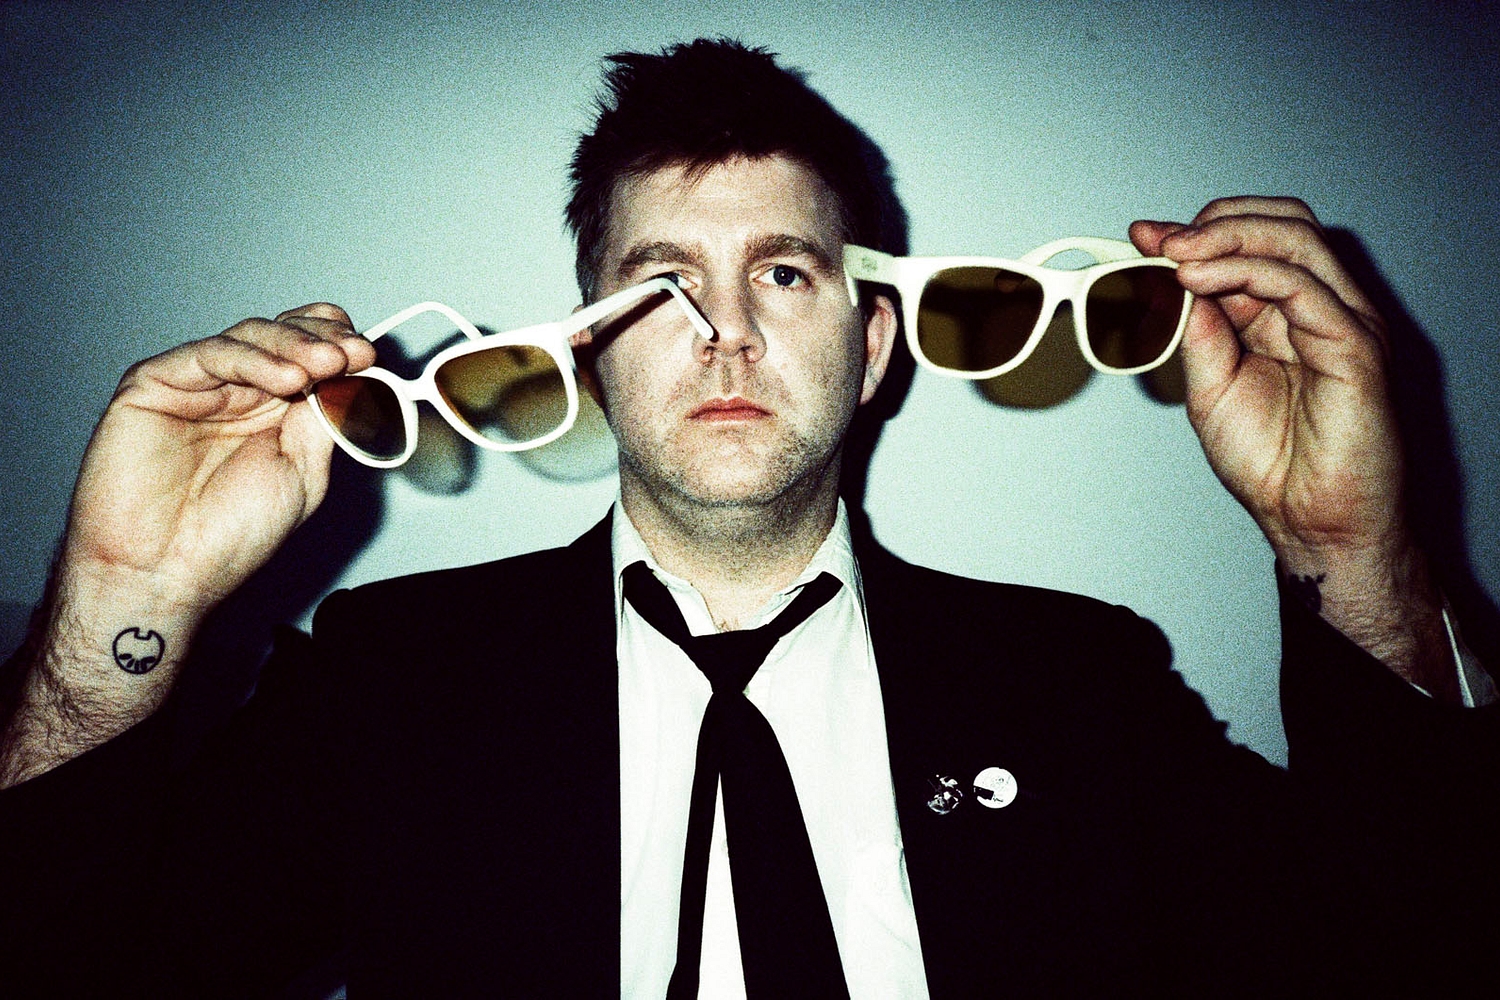 All My Friends: the faces who made LCD Soundsystem’s ‘Sound of Silver’